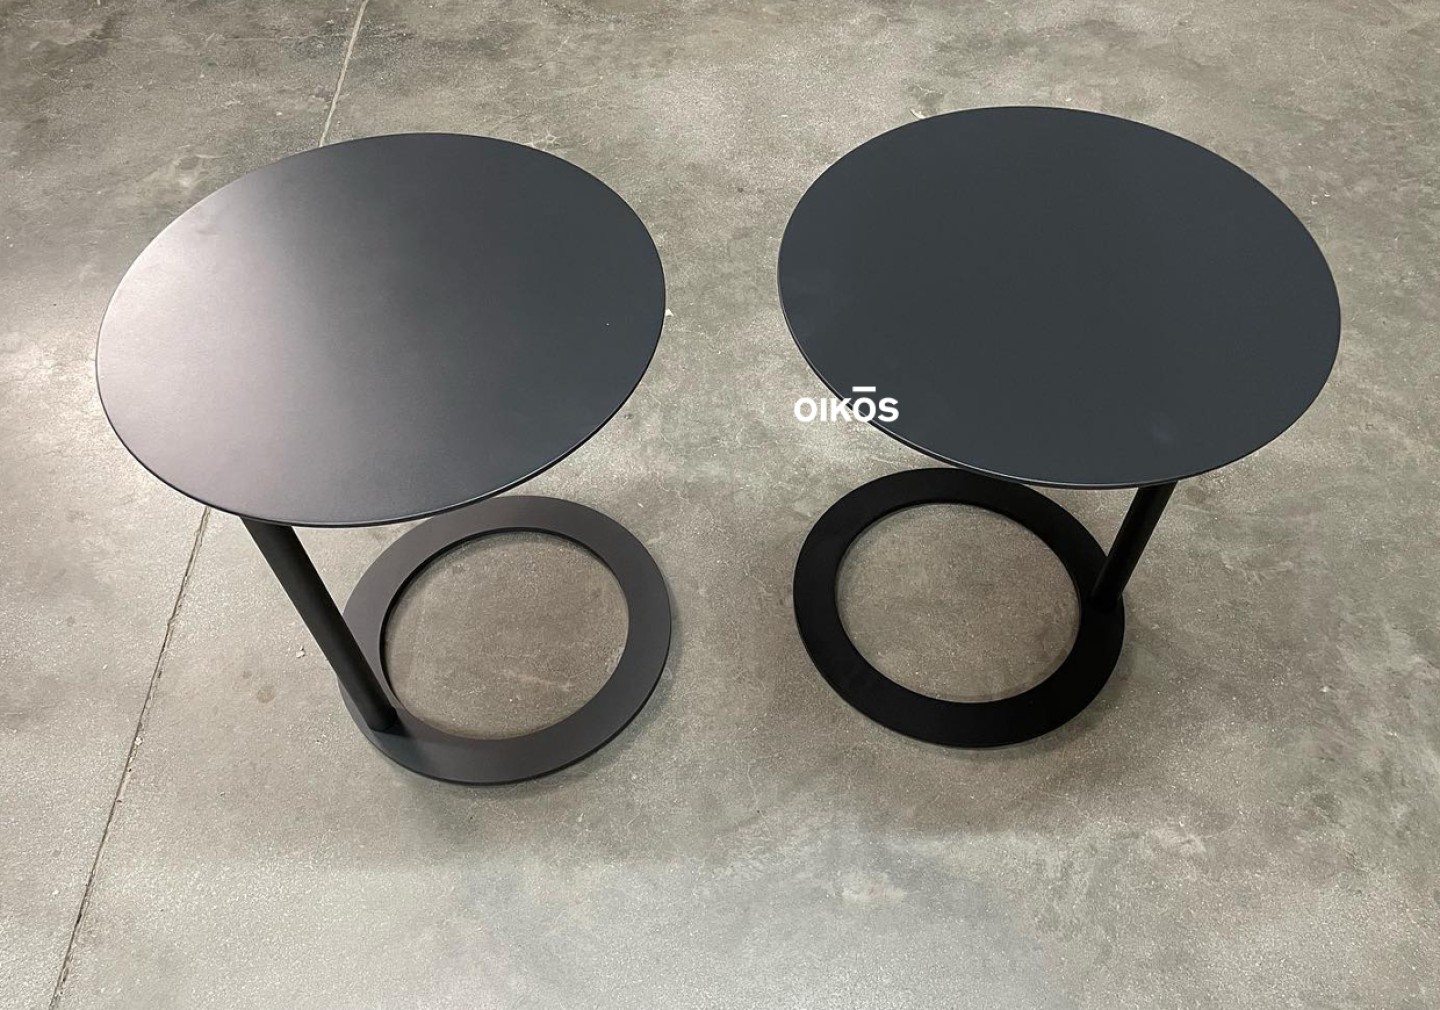 THE IO SIDE TABLE